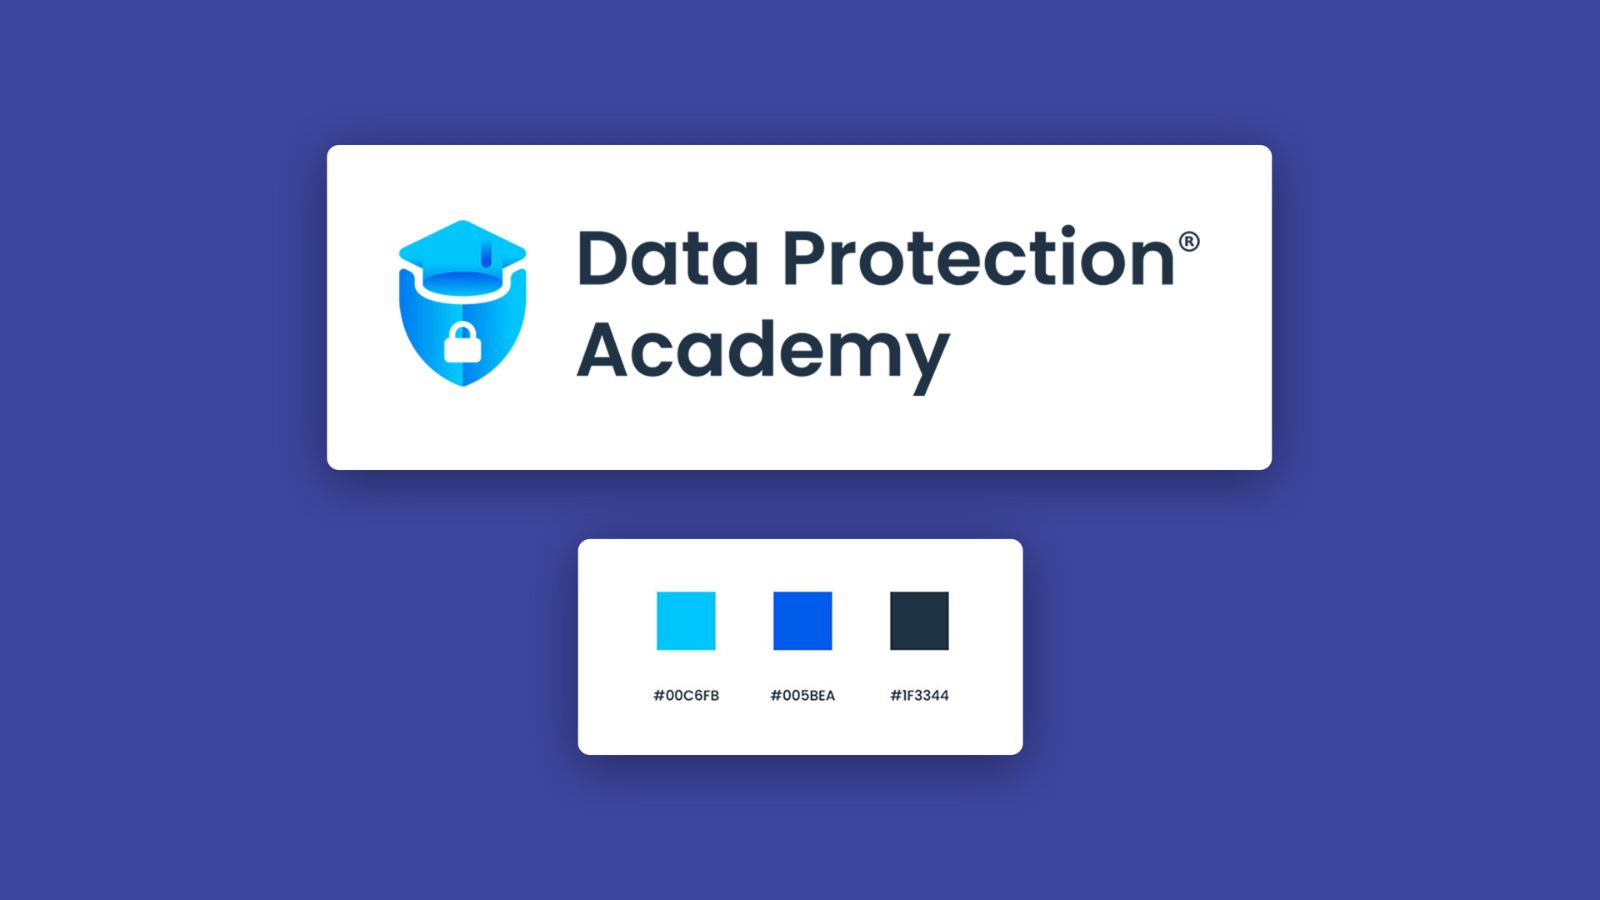 Data protection academy logo with colours Griffin House Consultancy